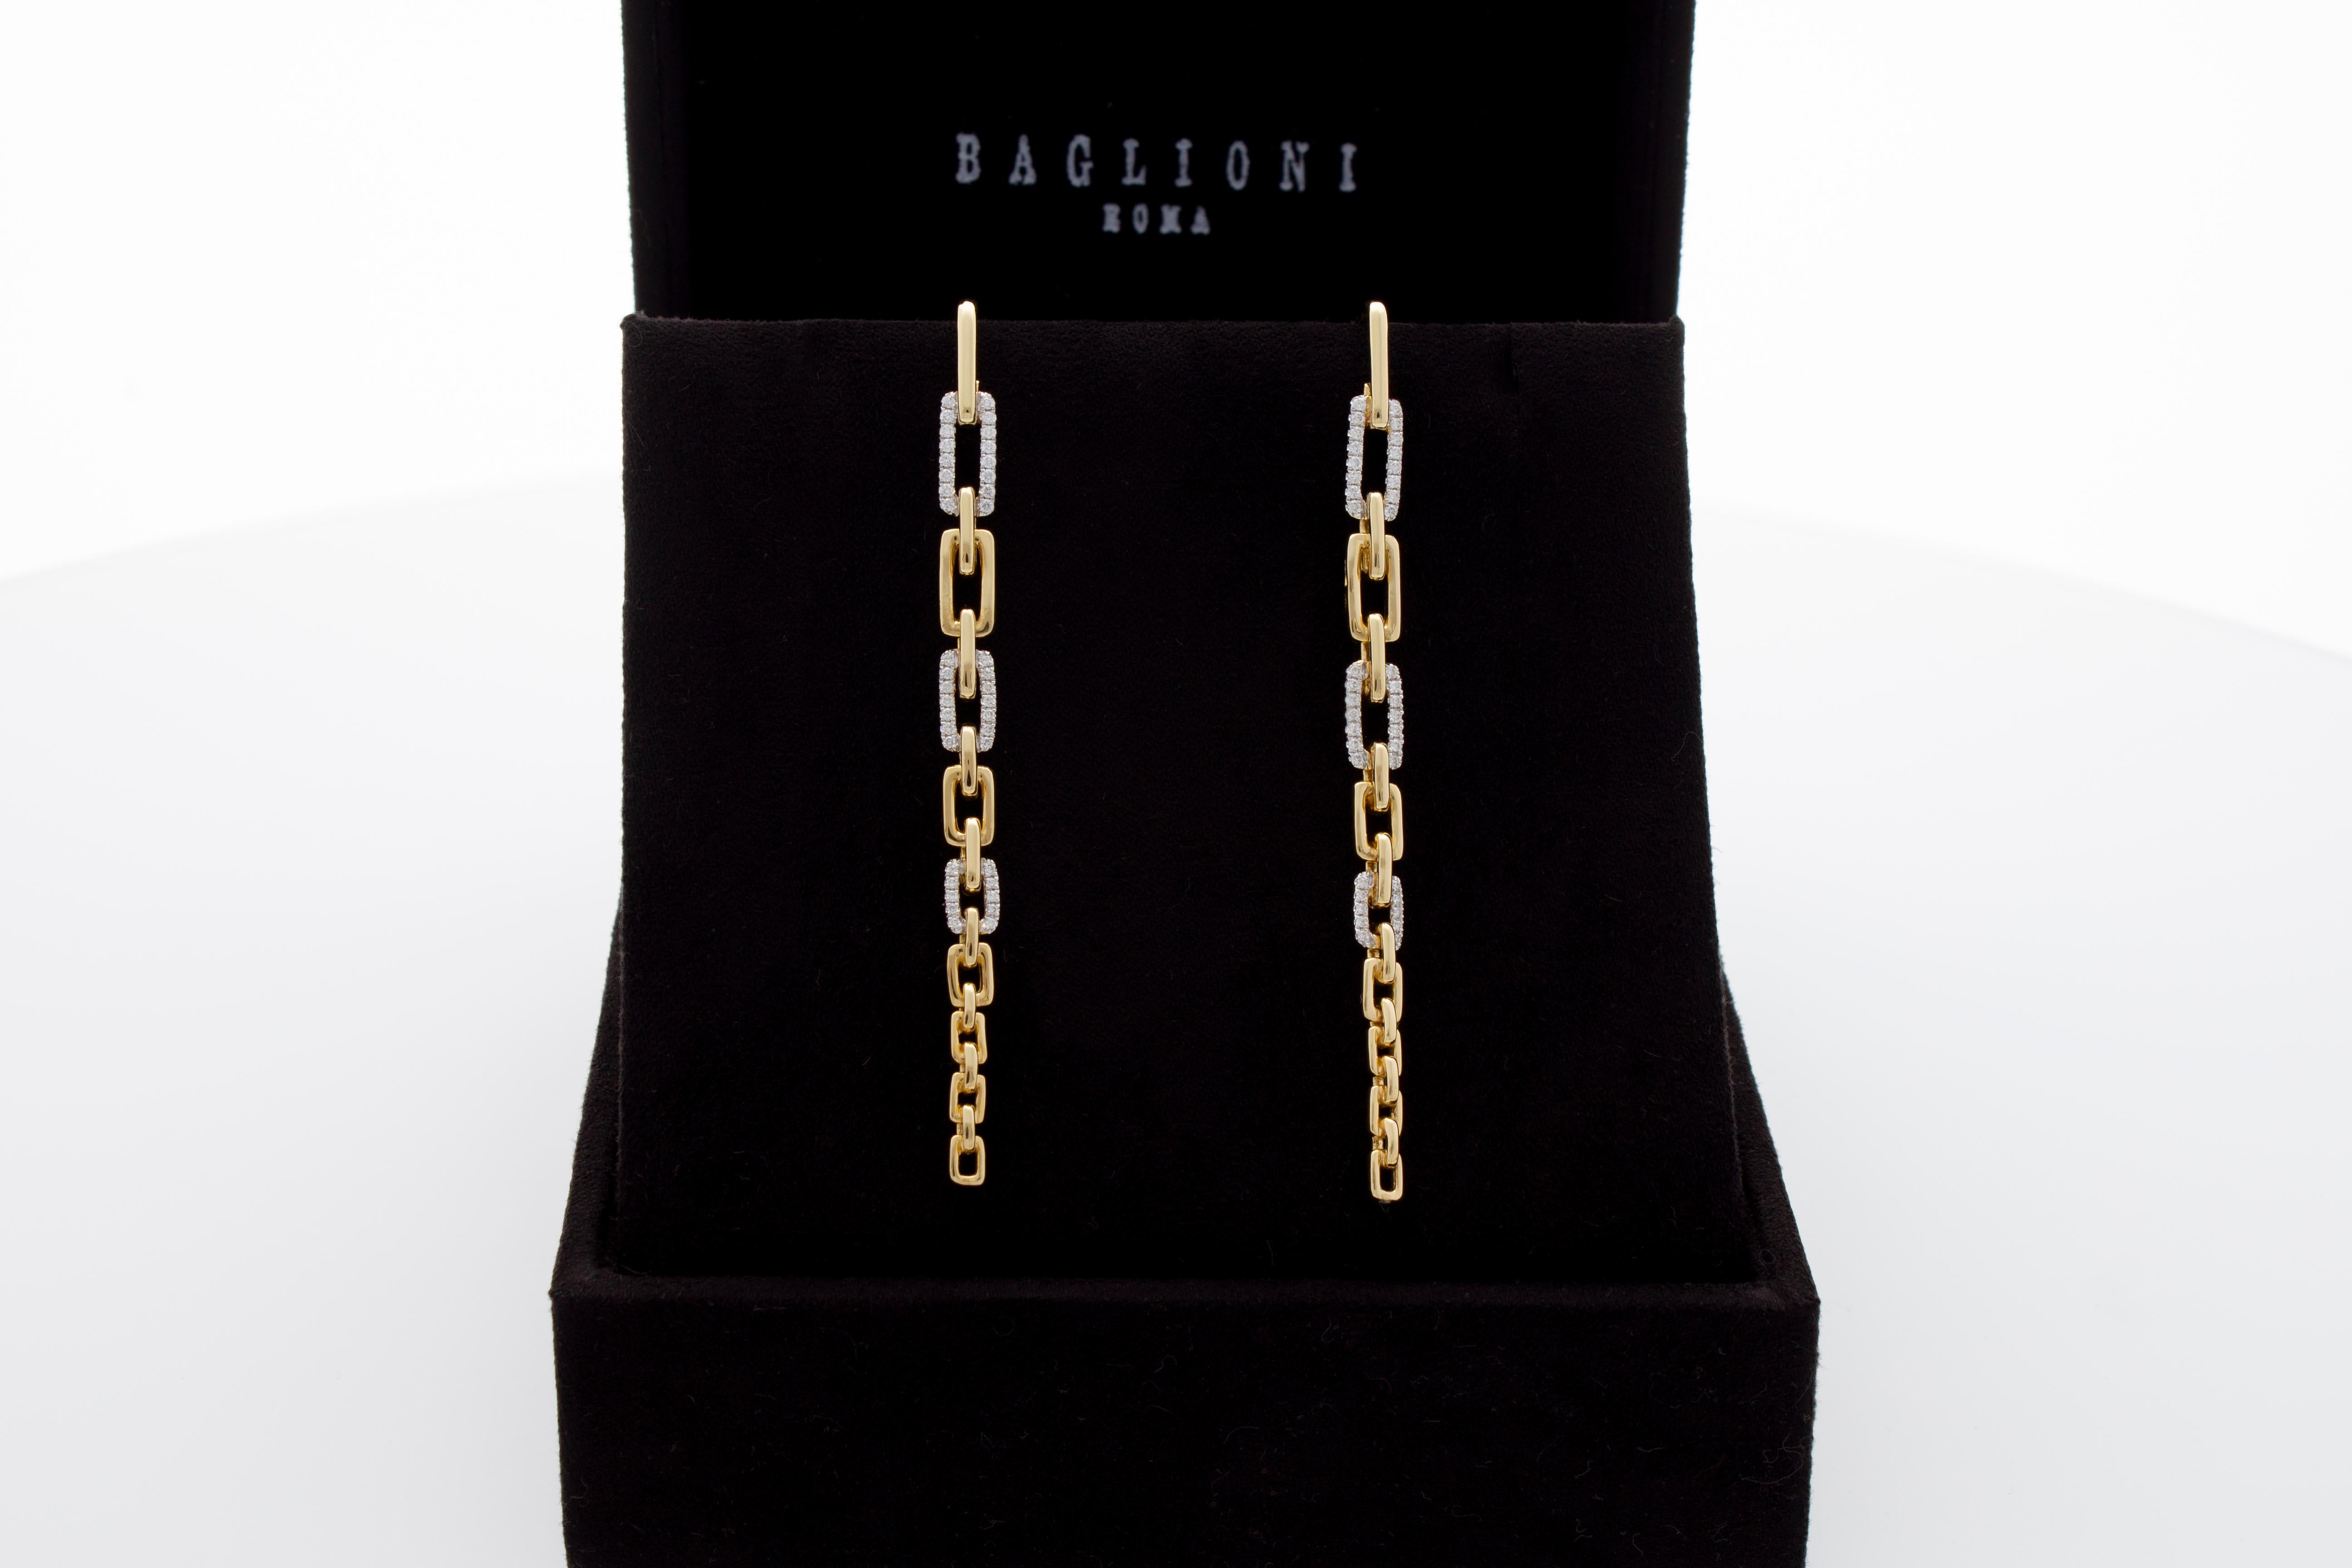 Contemporary Diamonds Ct 0.35 Pendant Earrings with Rectangular Links 18k Gold Made in Italy For Sale